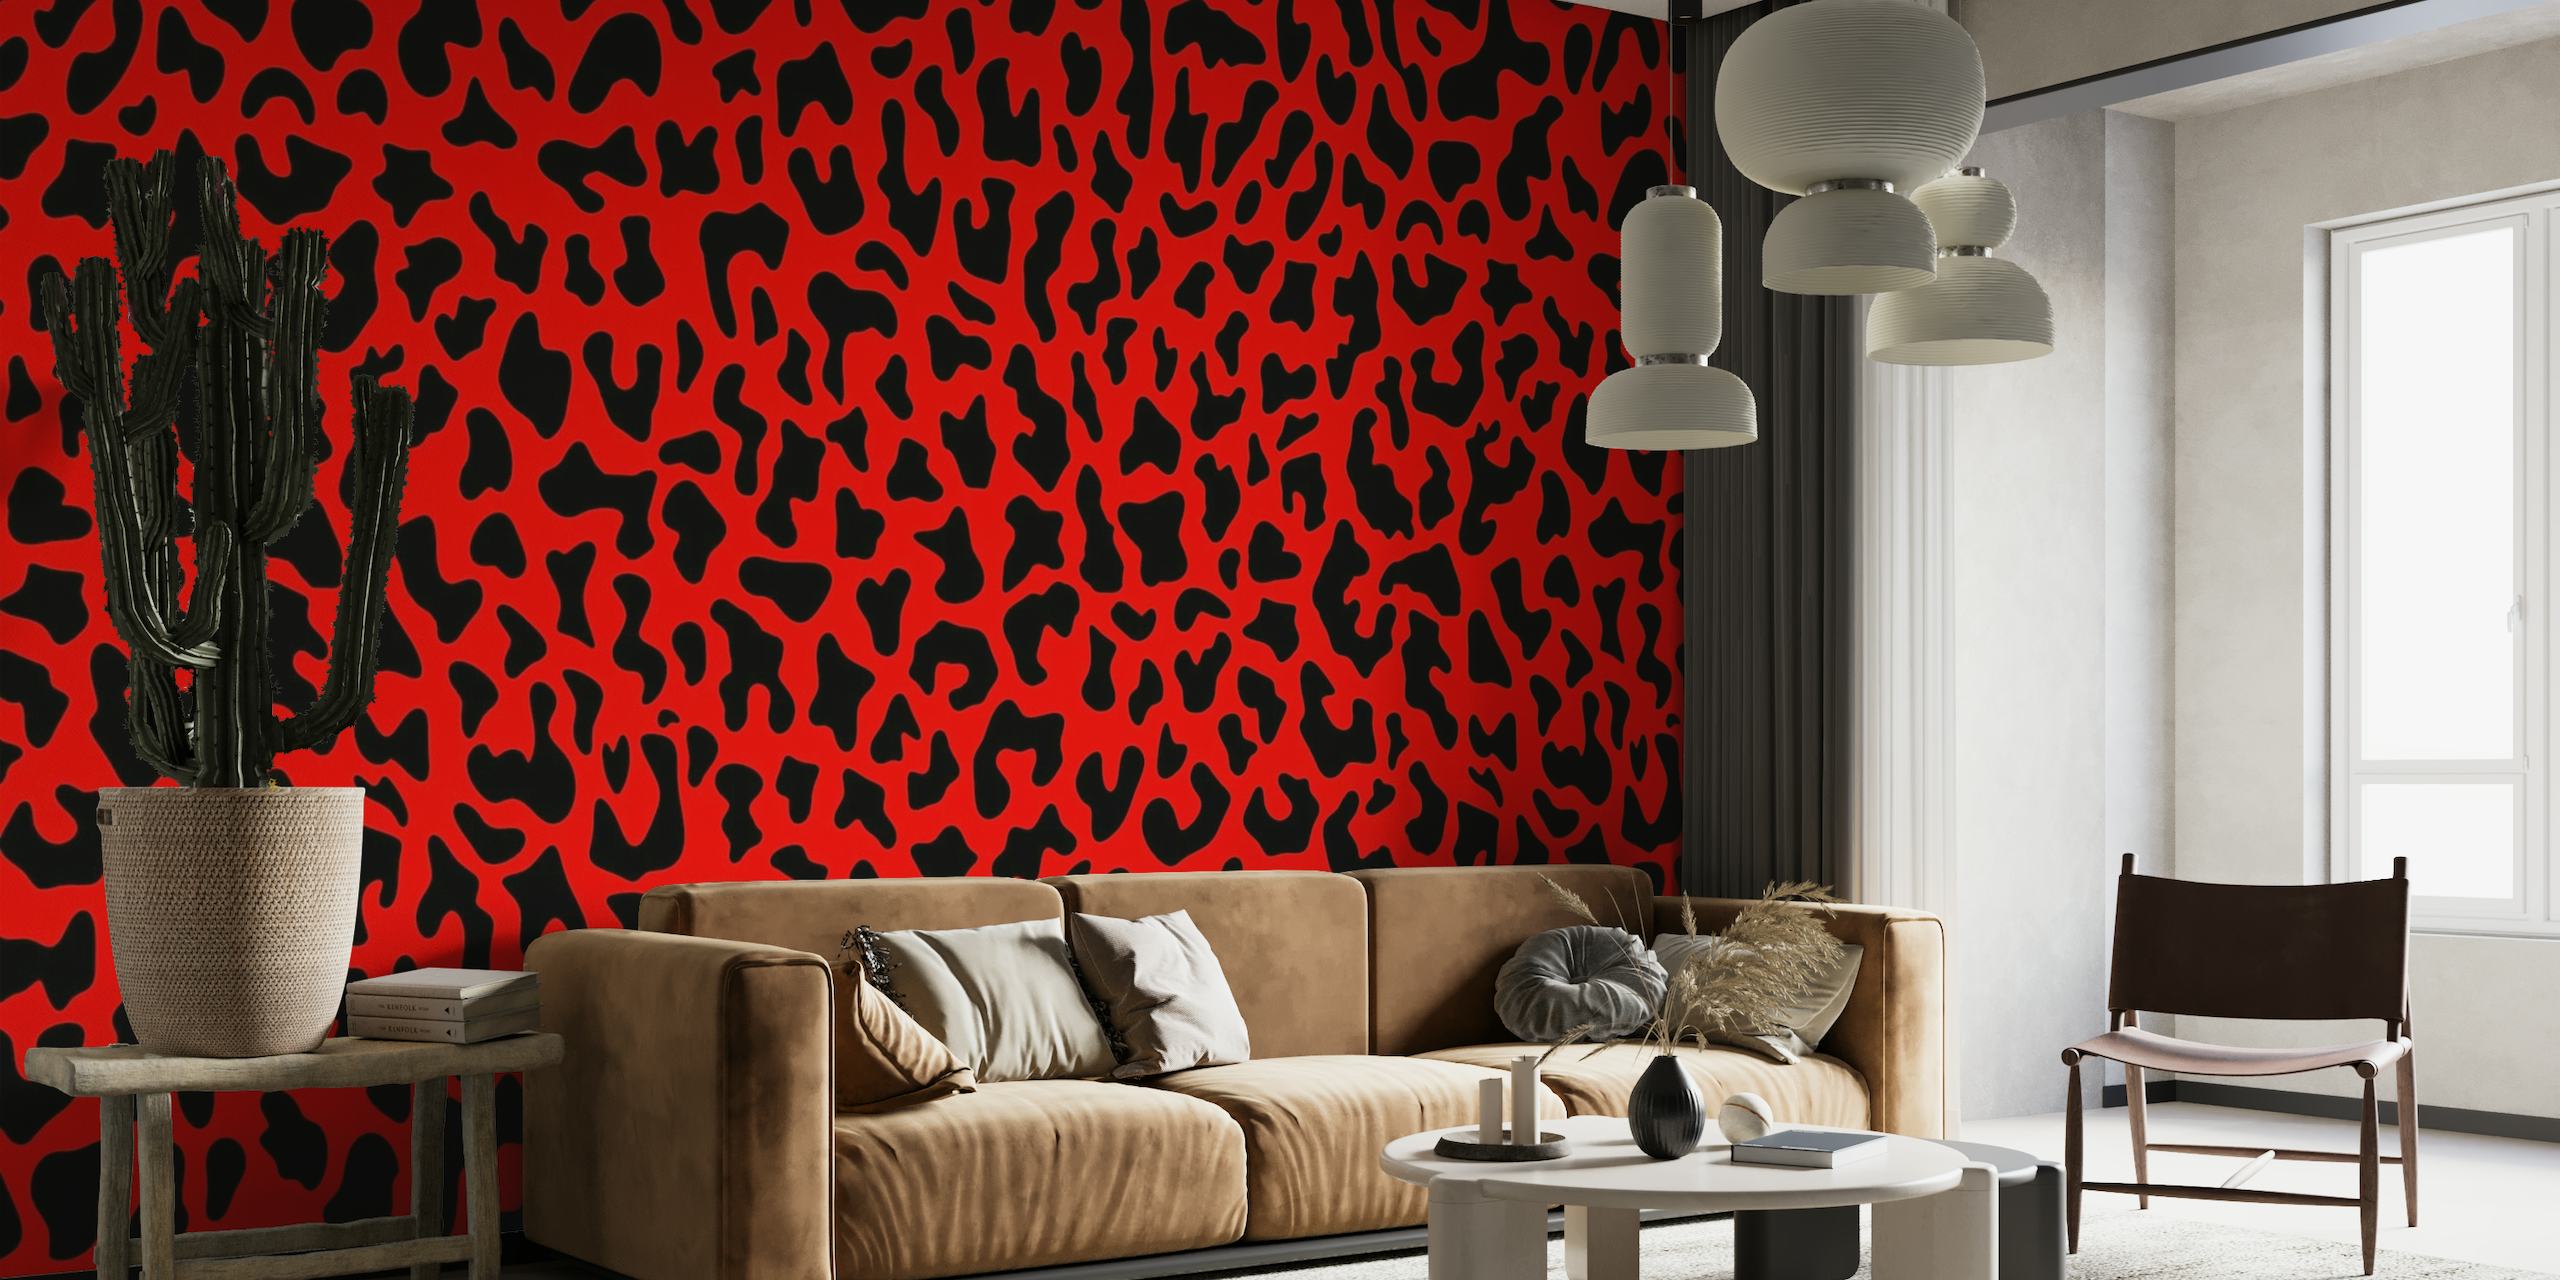 Leopard Print on Red papel pintado